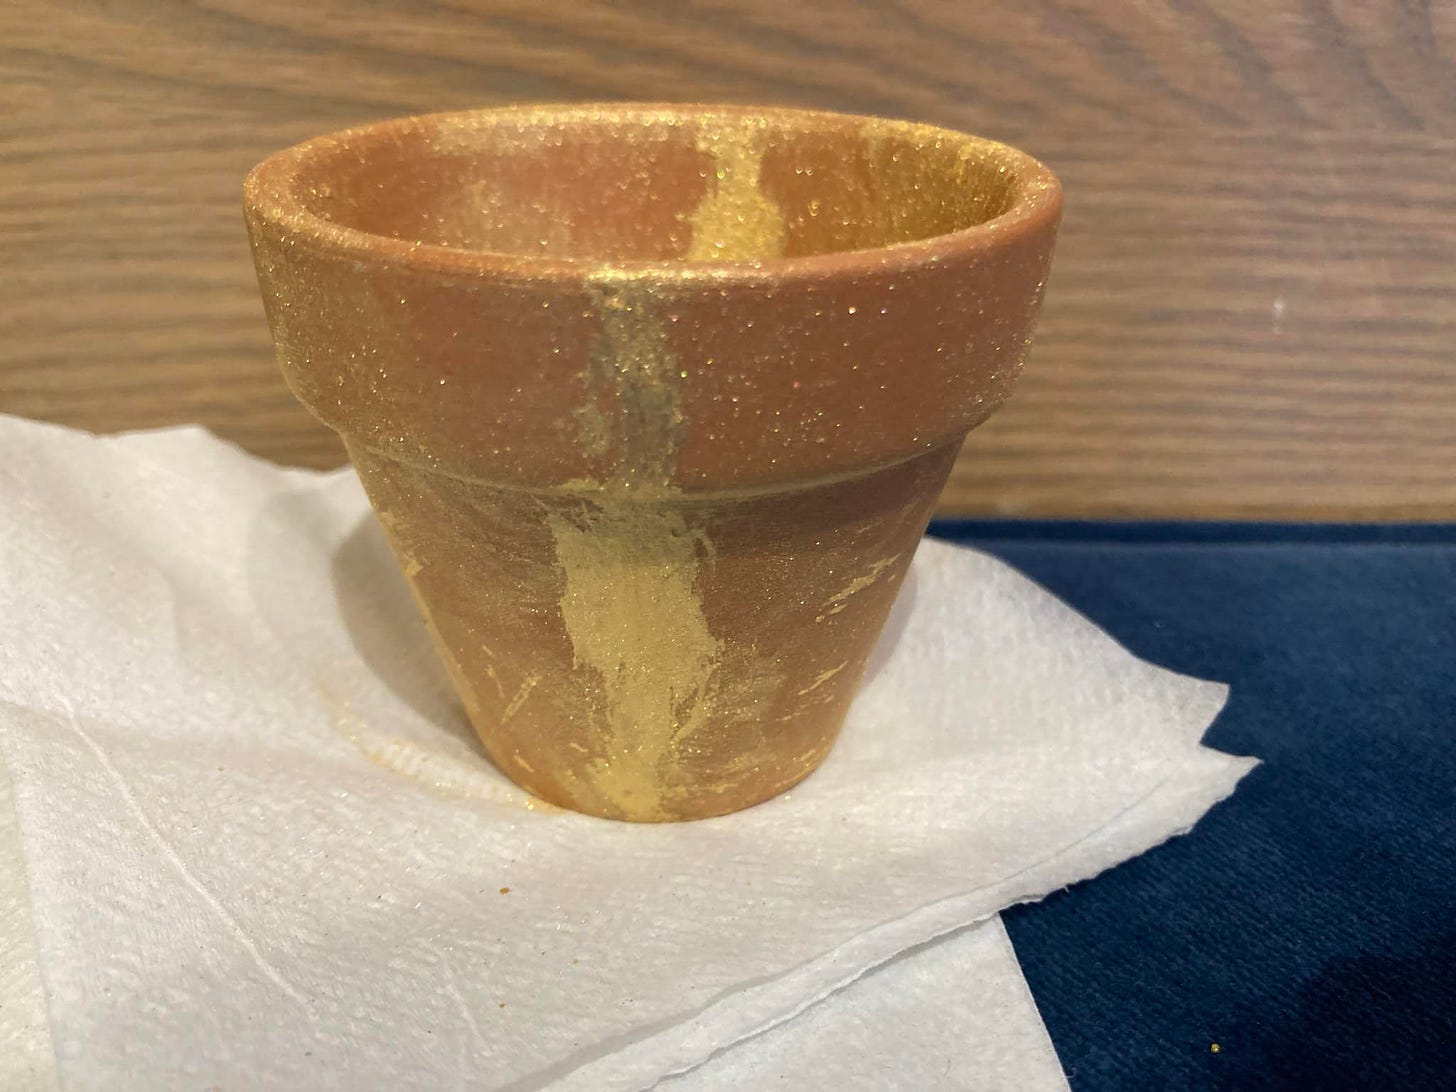 A flower pot smudged with gold, sparkling paint on a paper towel